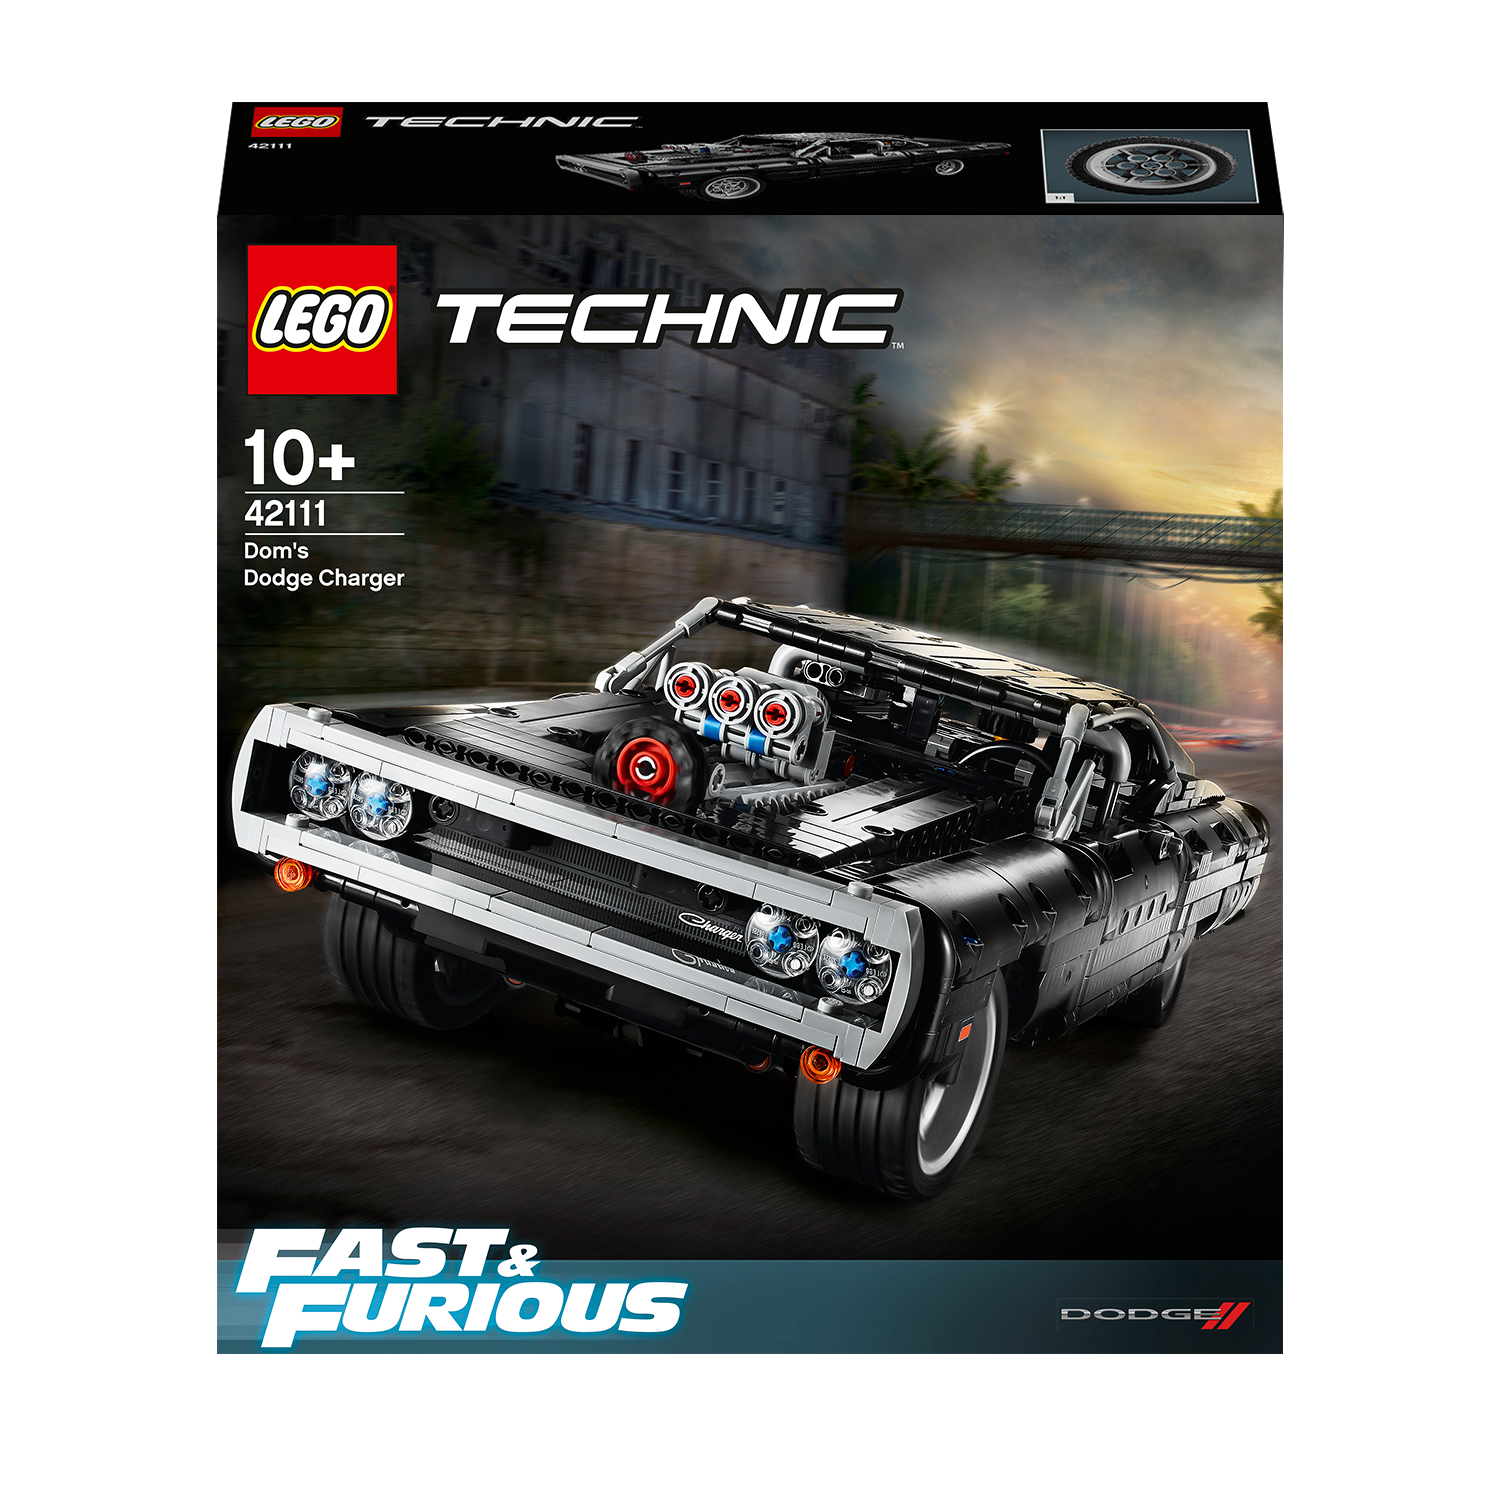 LEGO MOC LEGO Technic 42111 fast & furious Dom`s dodge charger RC